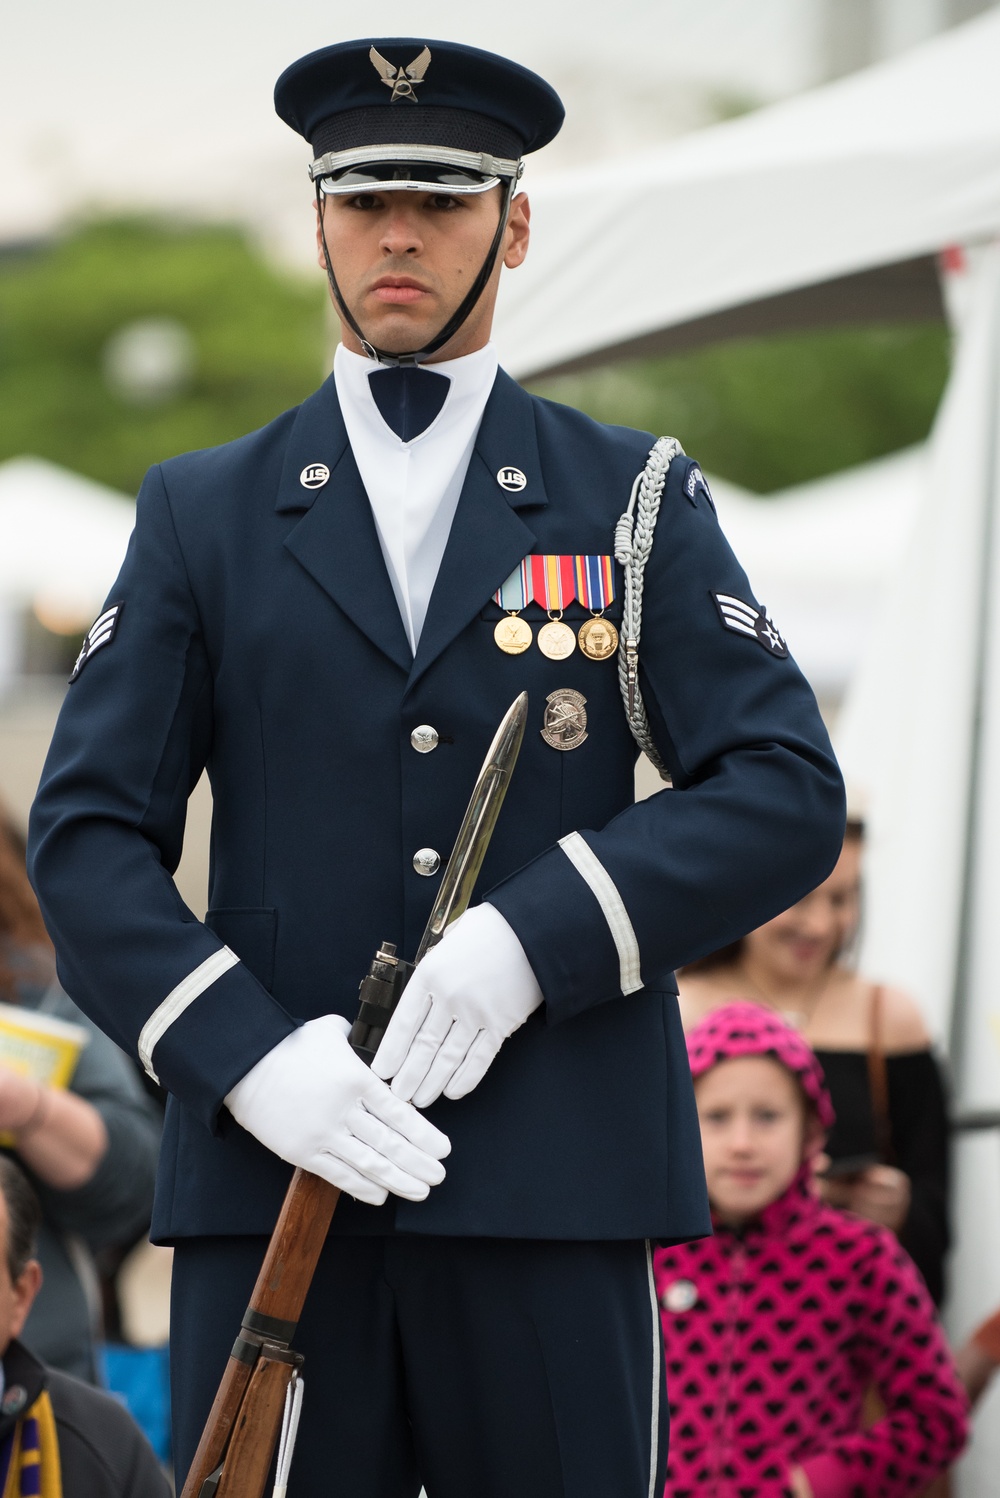 Air Force Honor Guard wows crowd at Kentucky Derby Festival